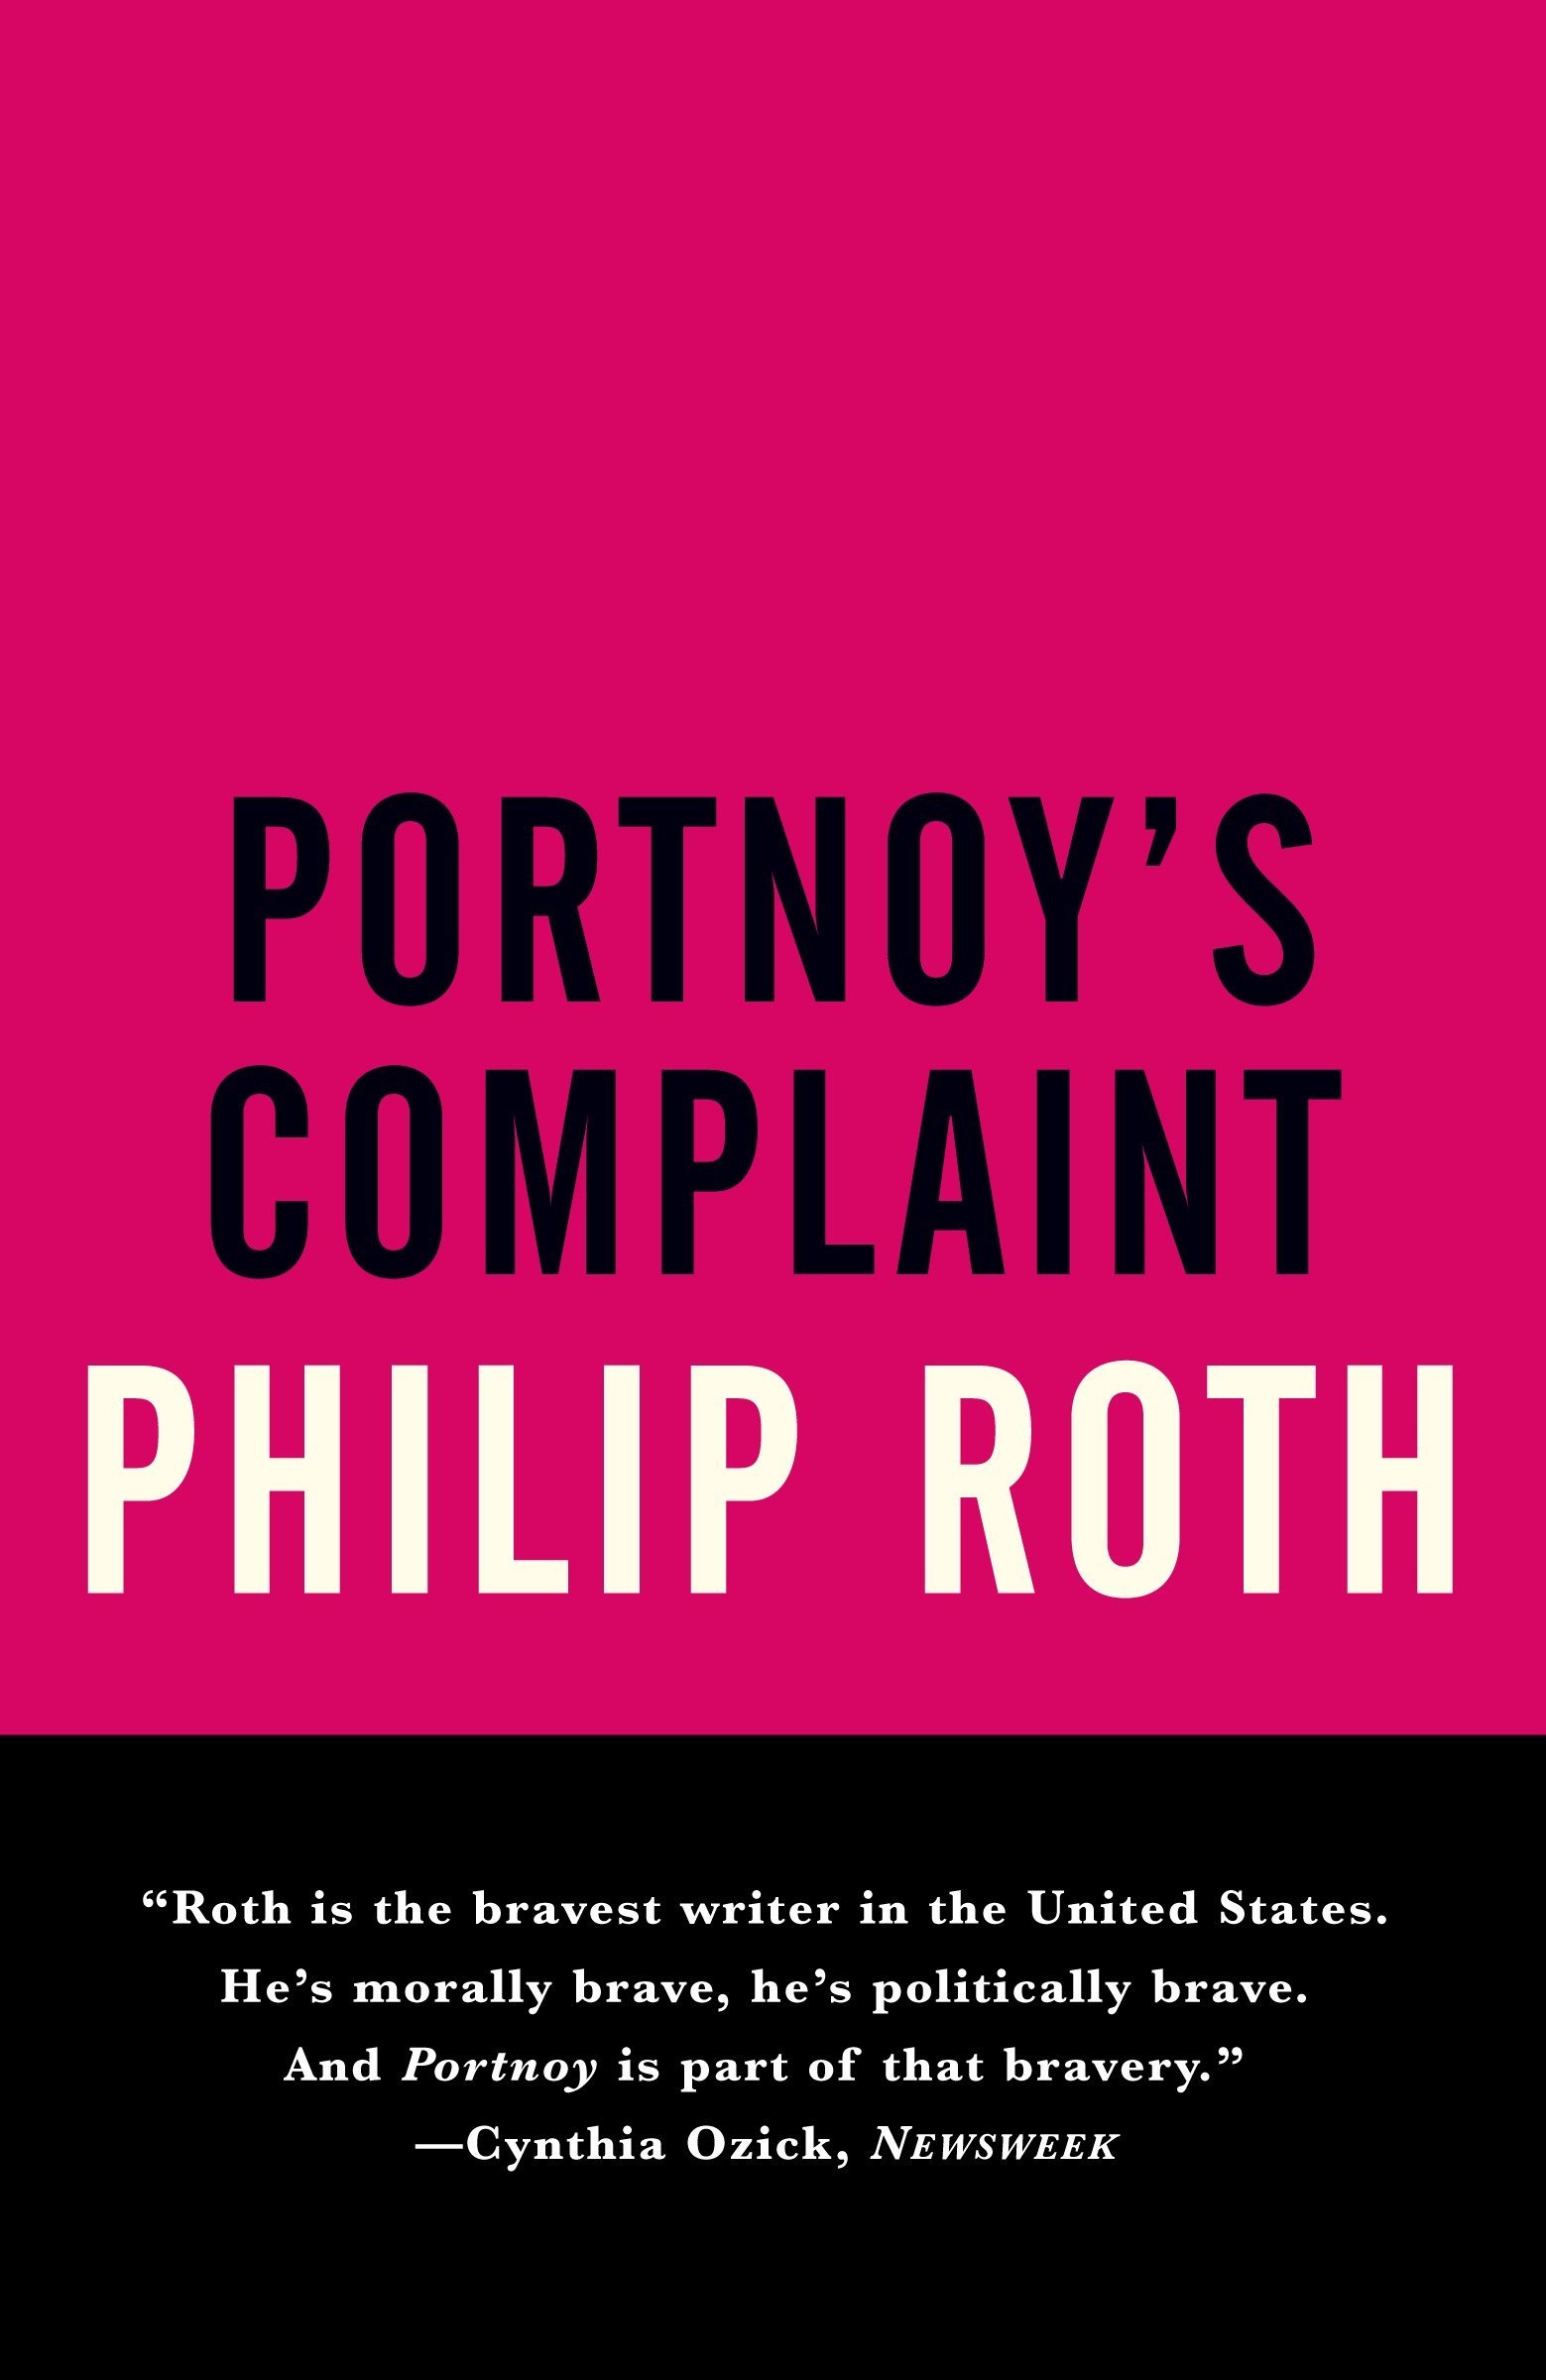 'Portnoy’s Complaint' by Philip Roth